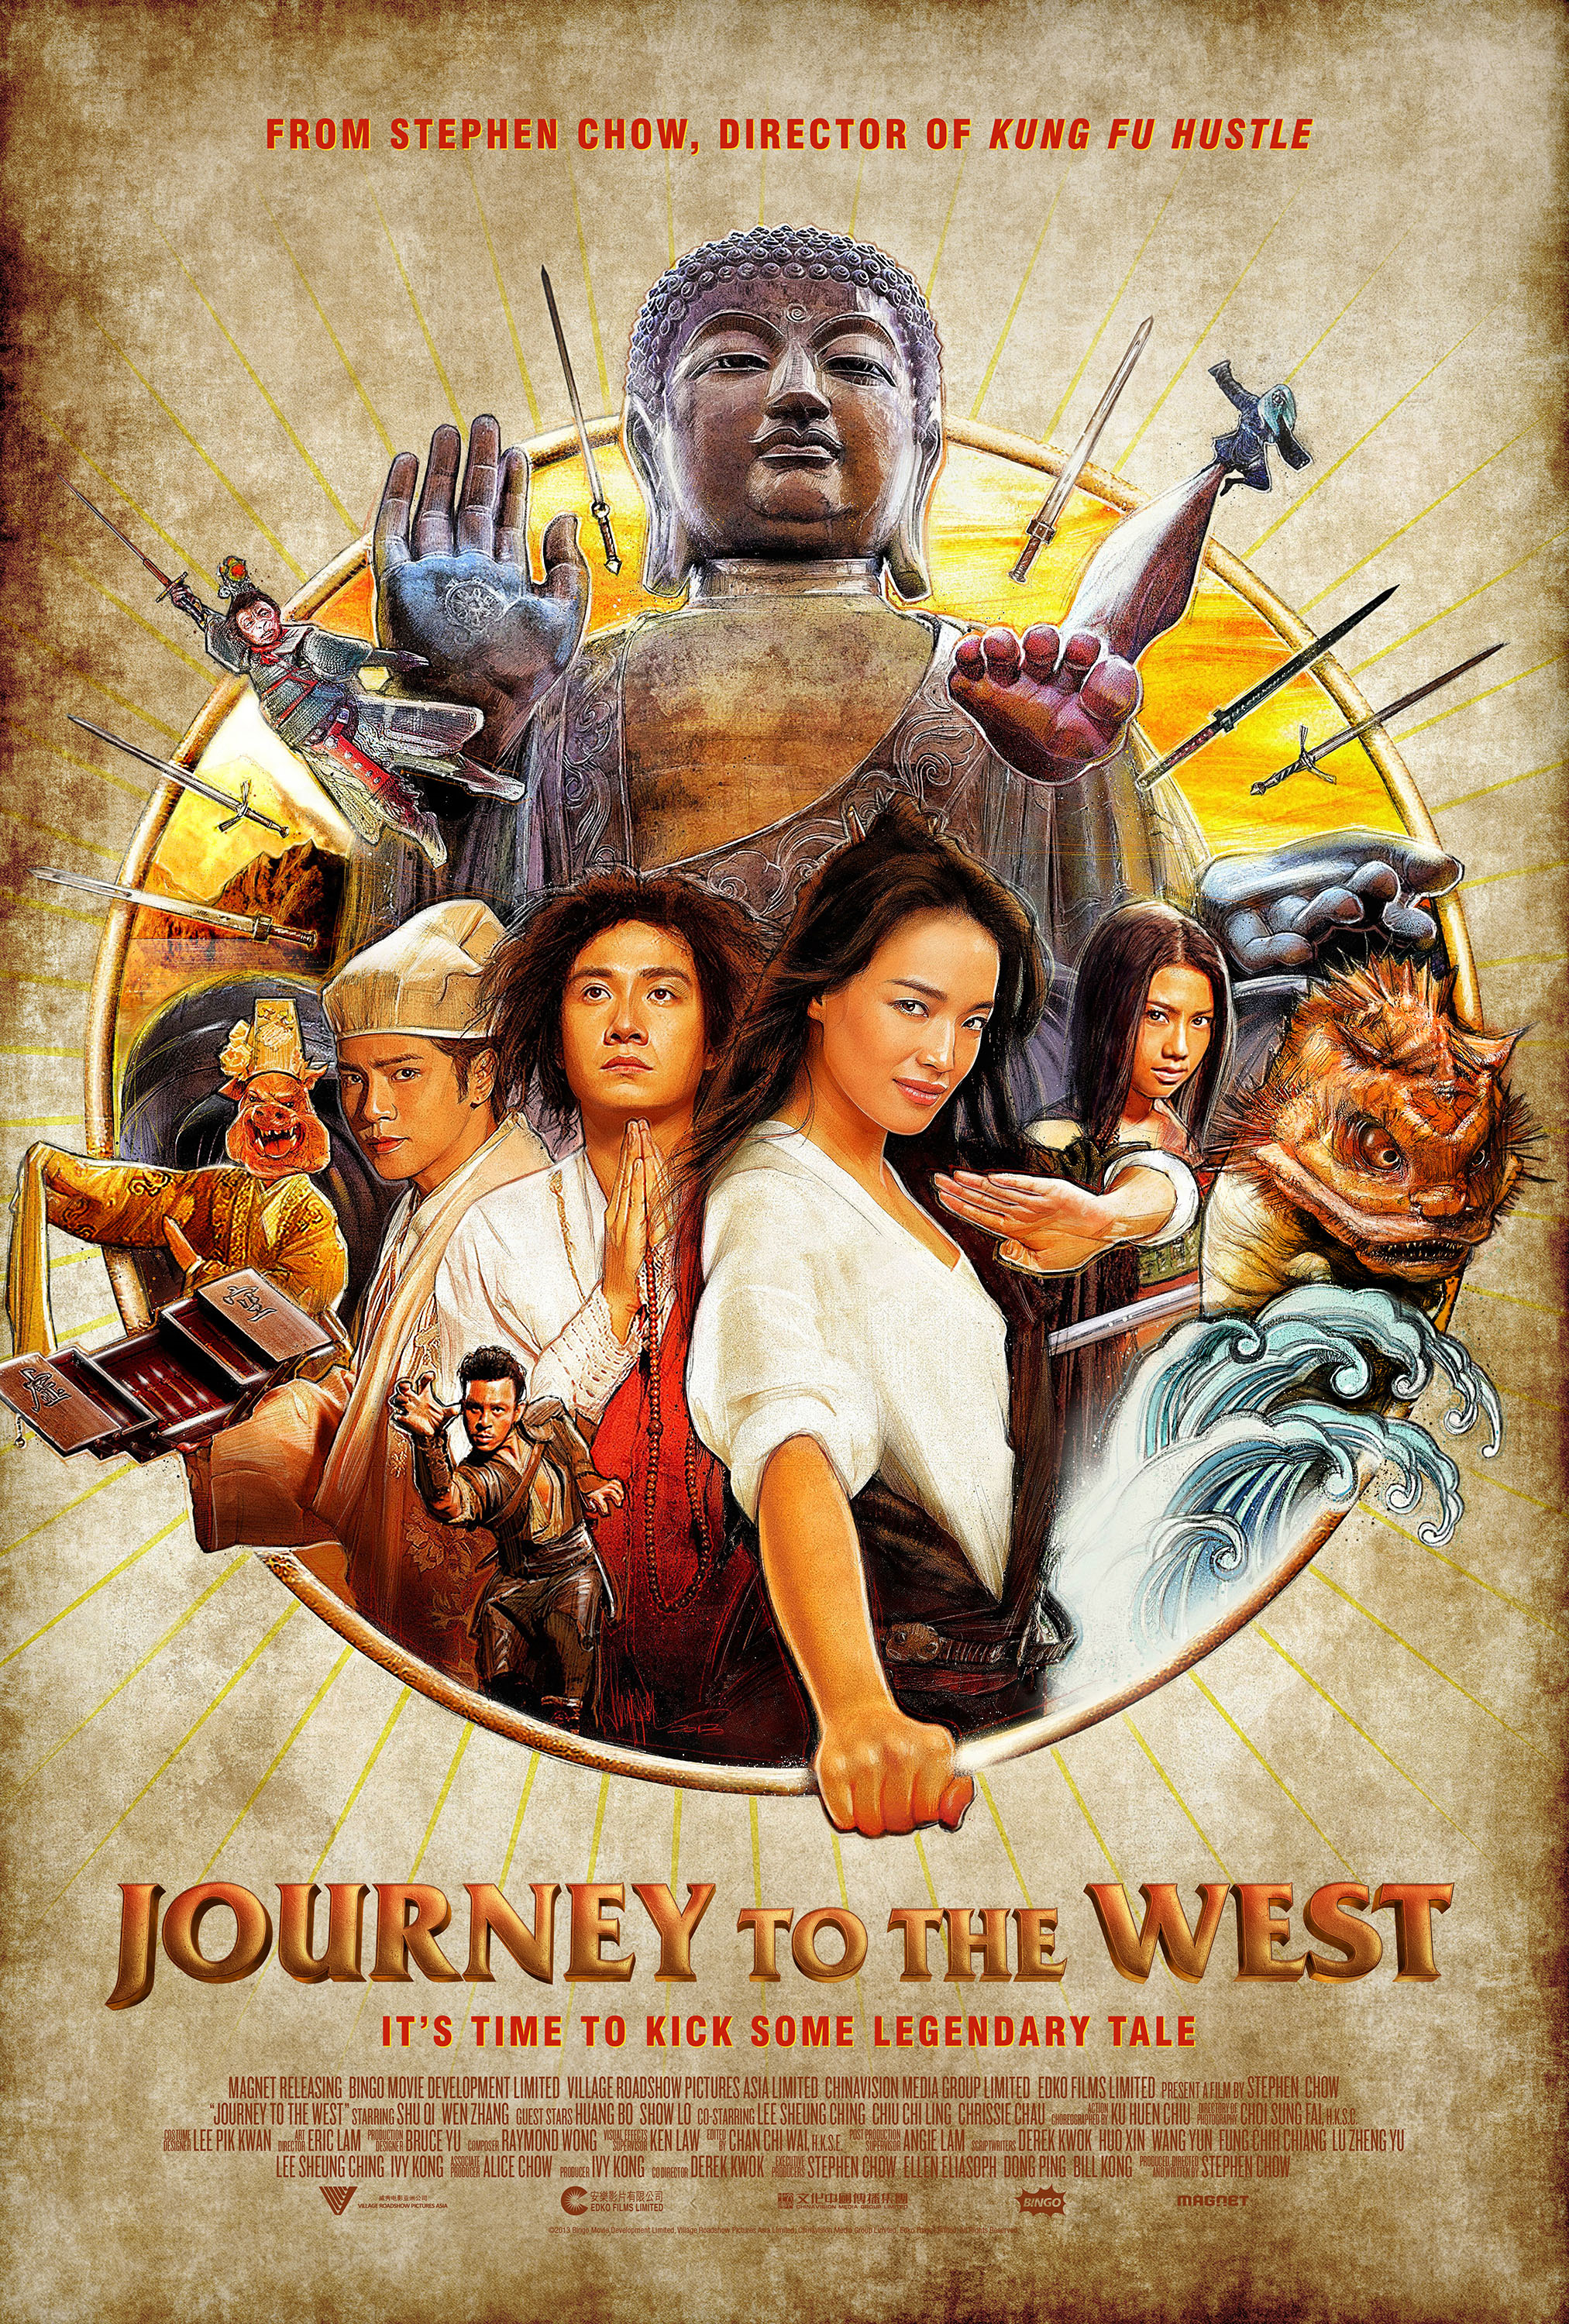 Journey to the West 2013 Film Poster.jpg